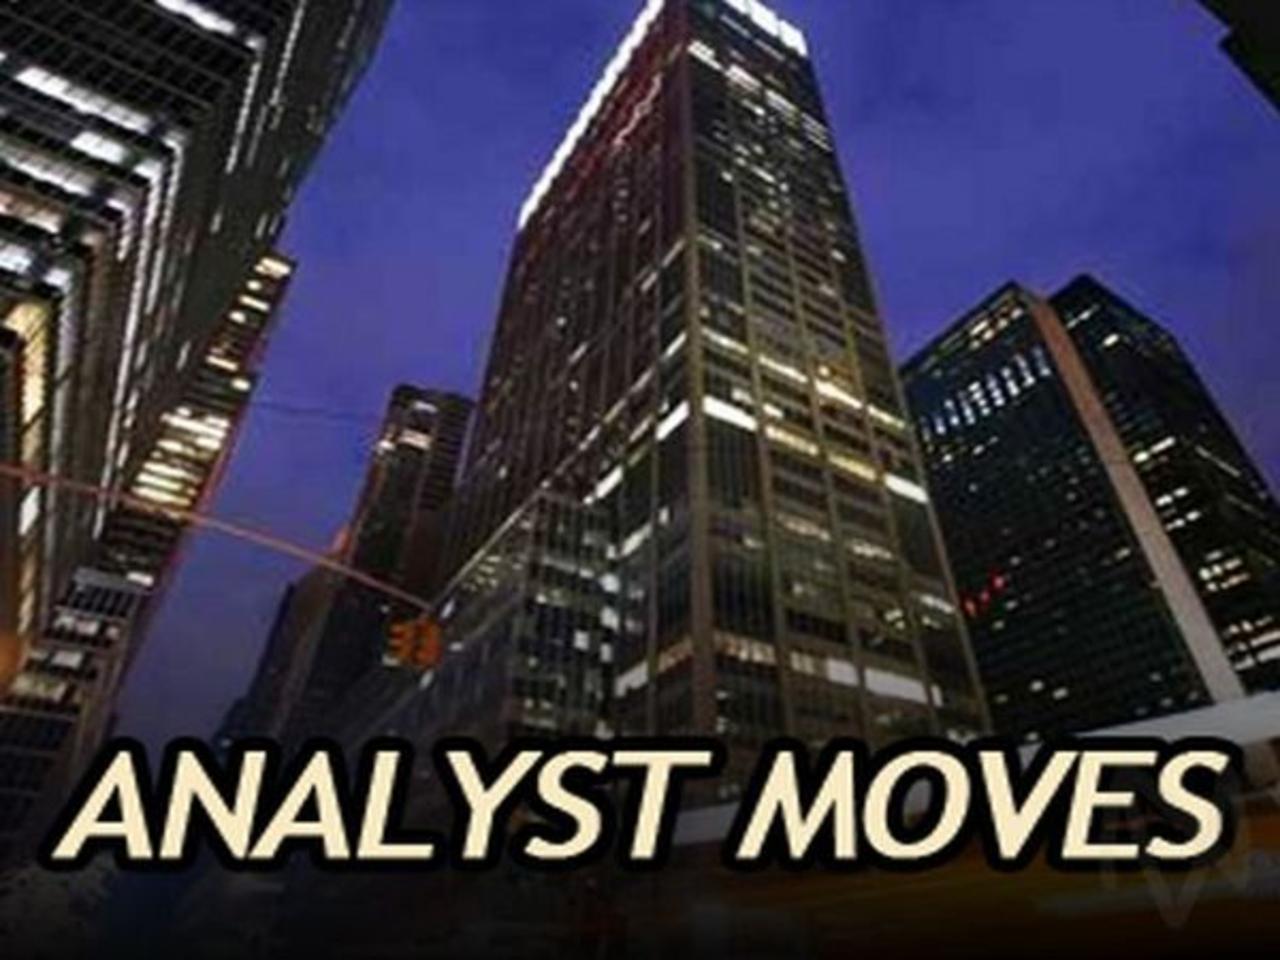 Dow Analyst Moves: CVX